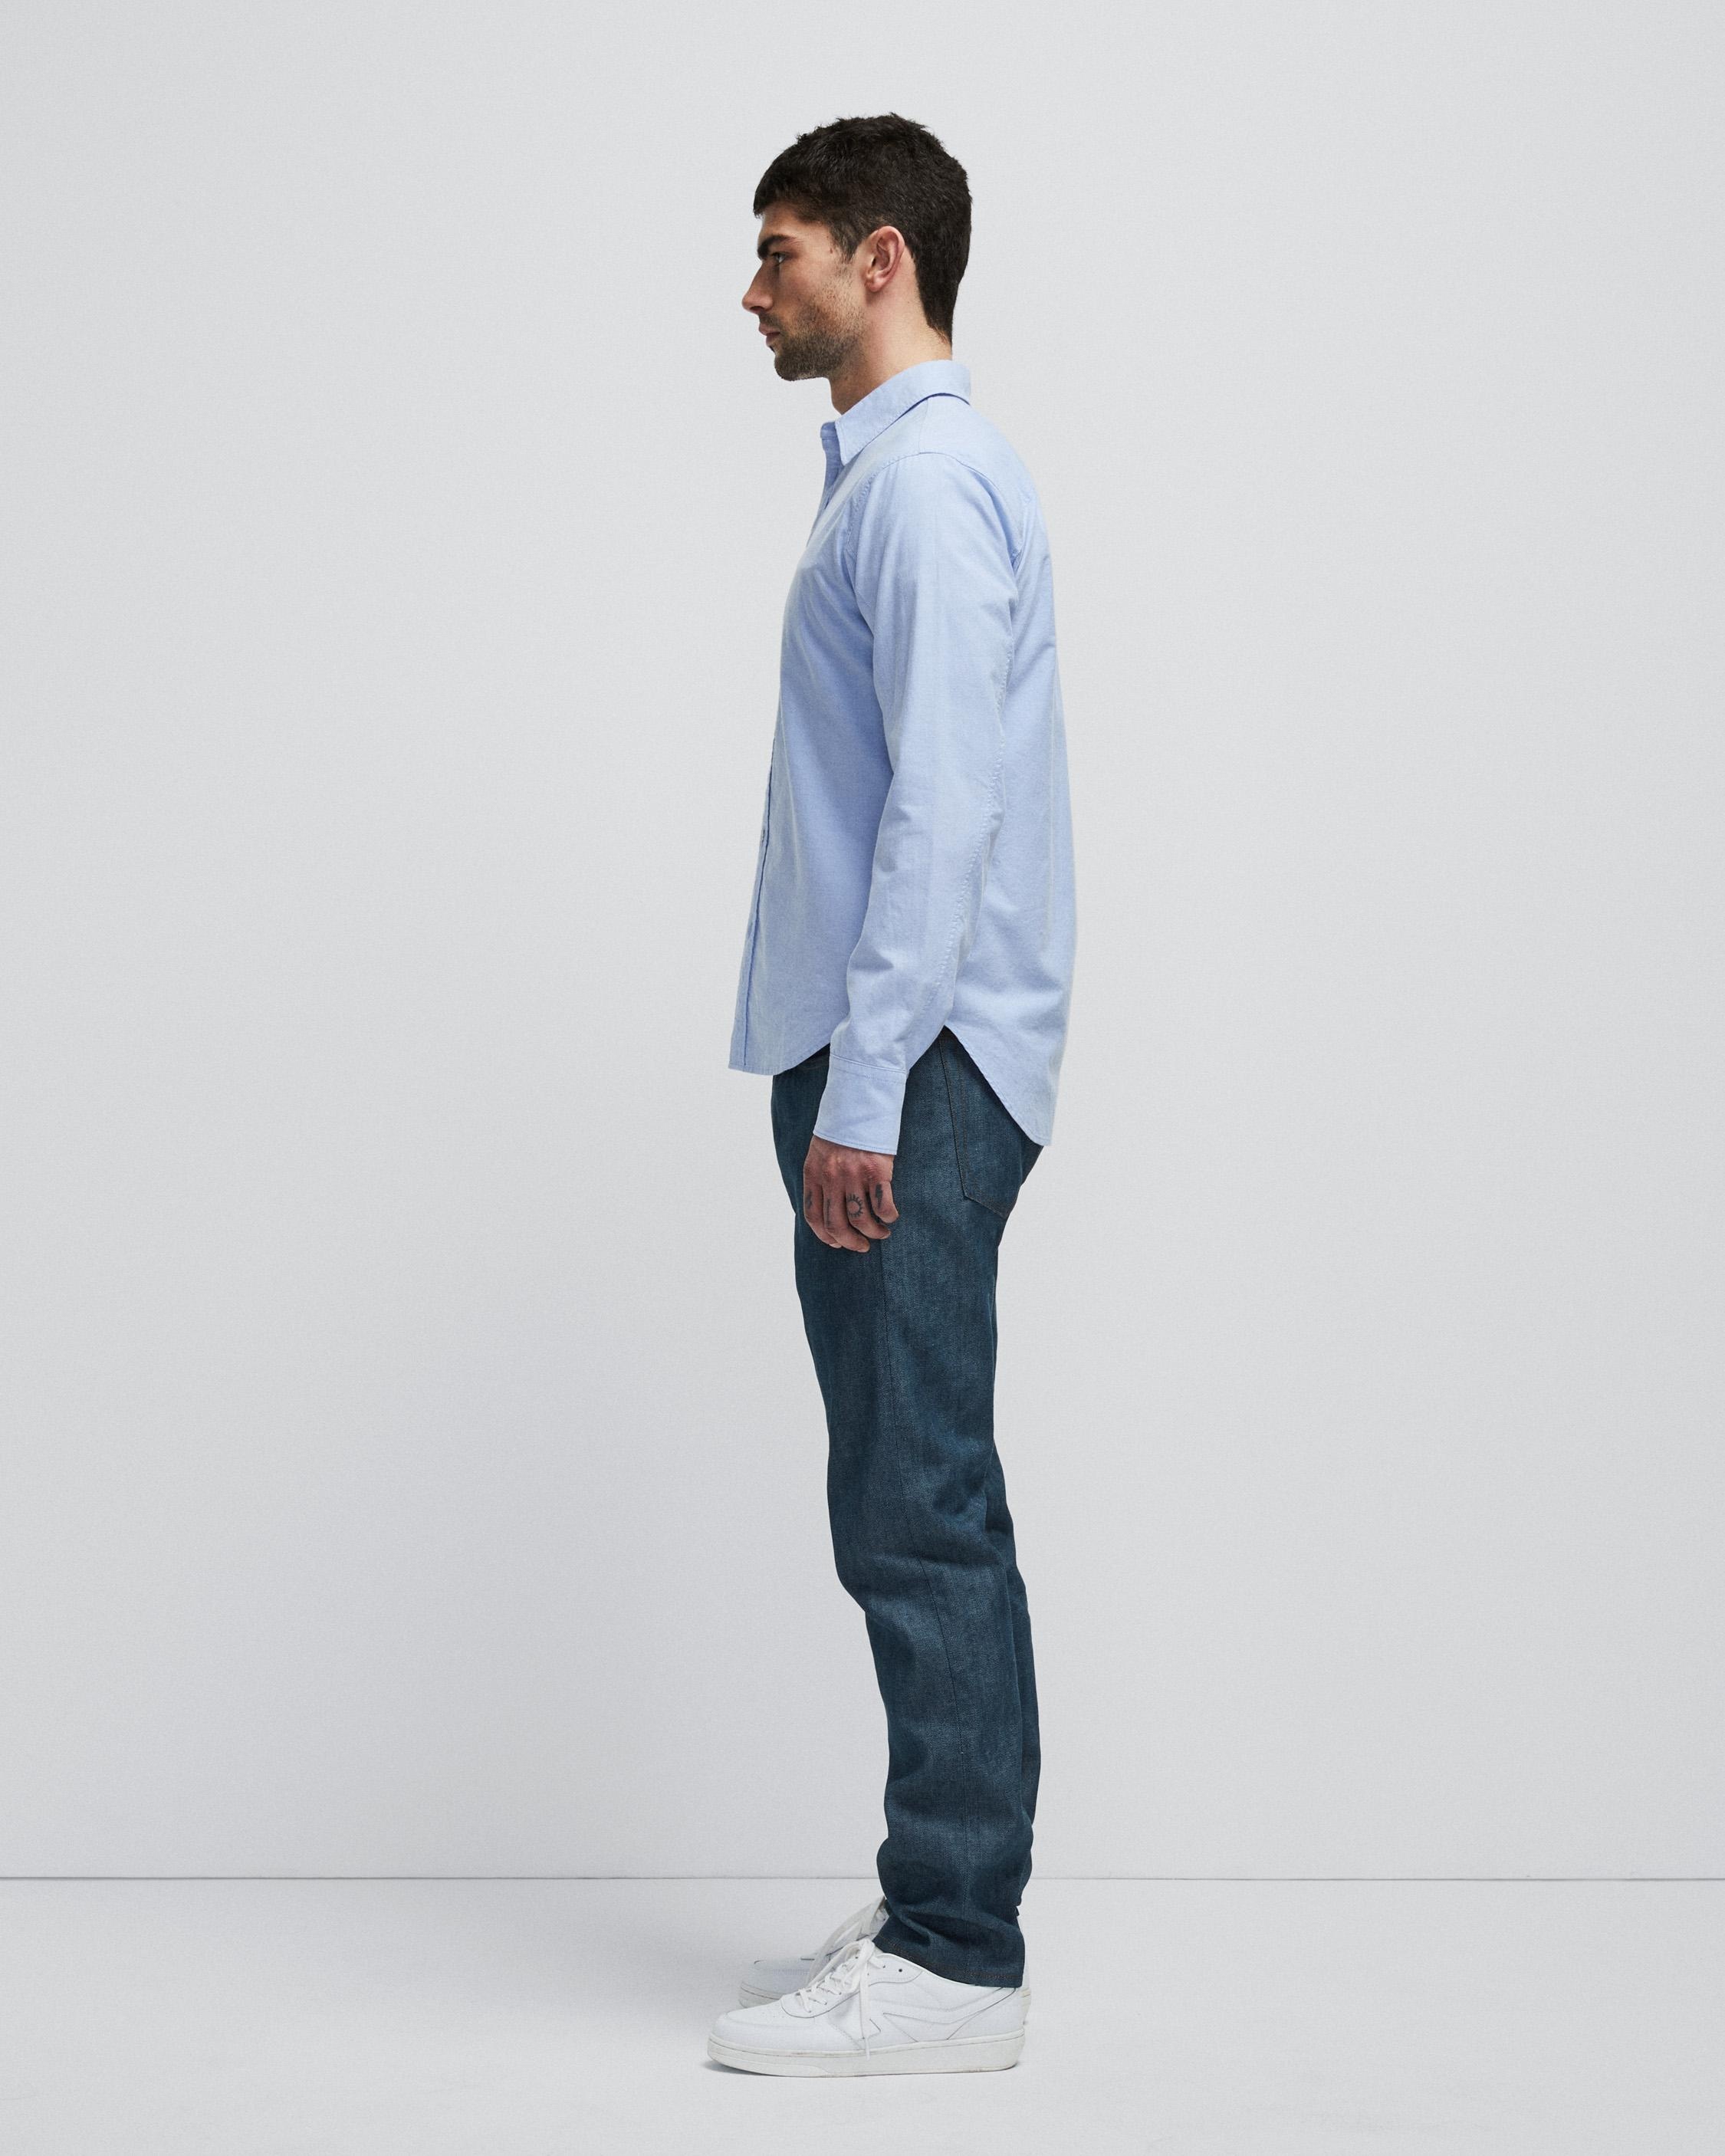 Fit 2 Engineered Cotton Oxford Shirt
Slim Fit Shirt - 4